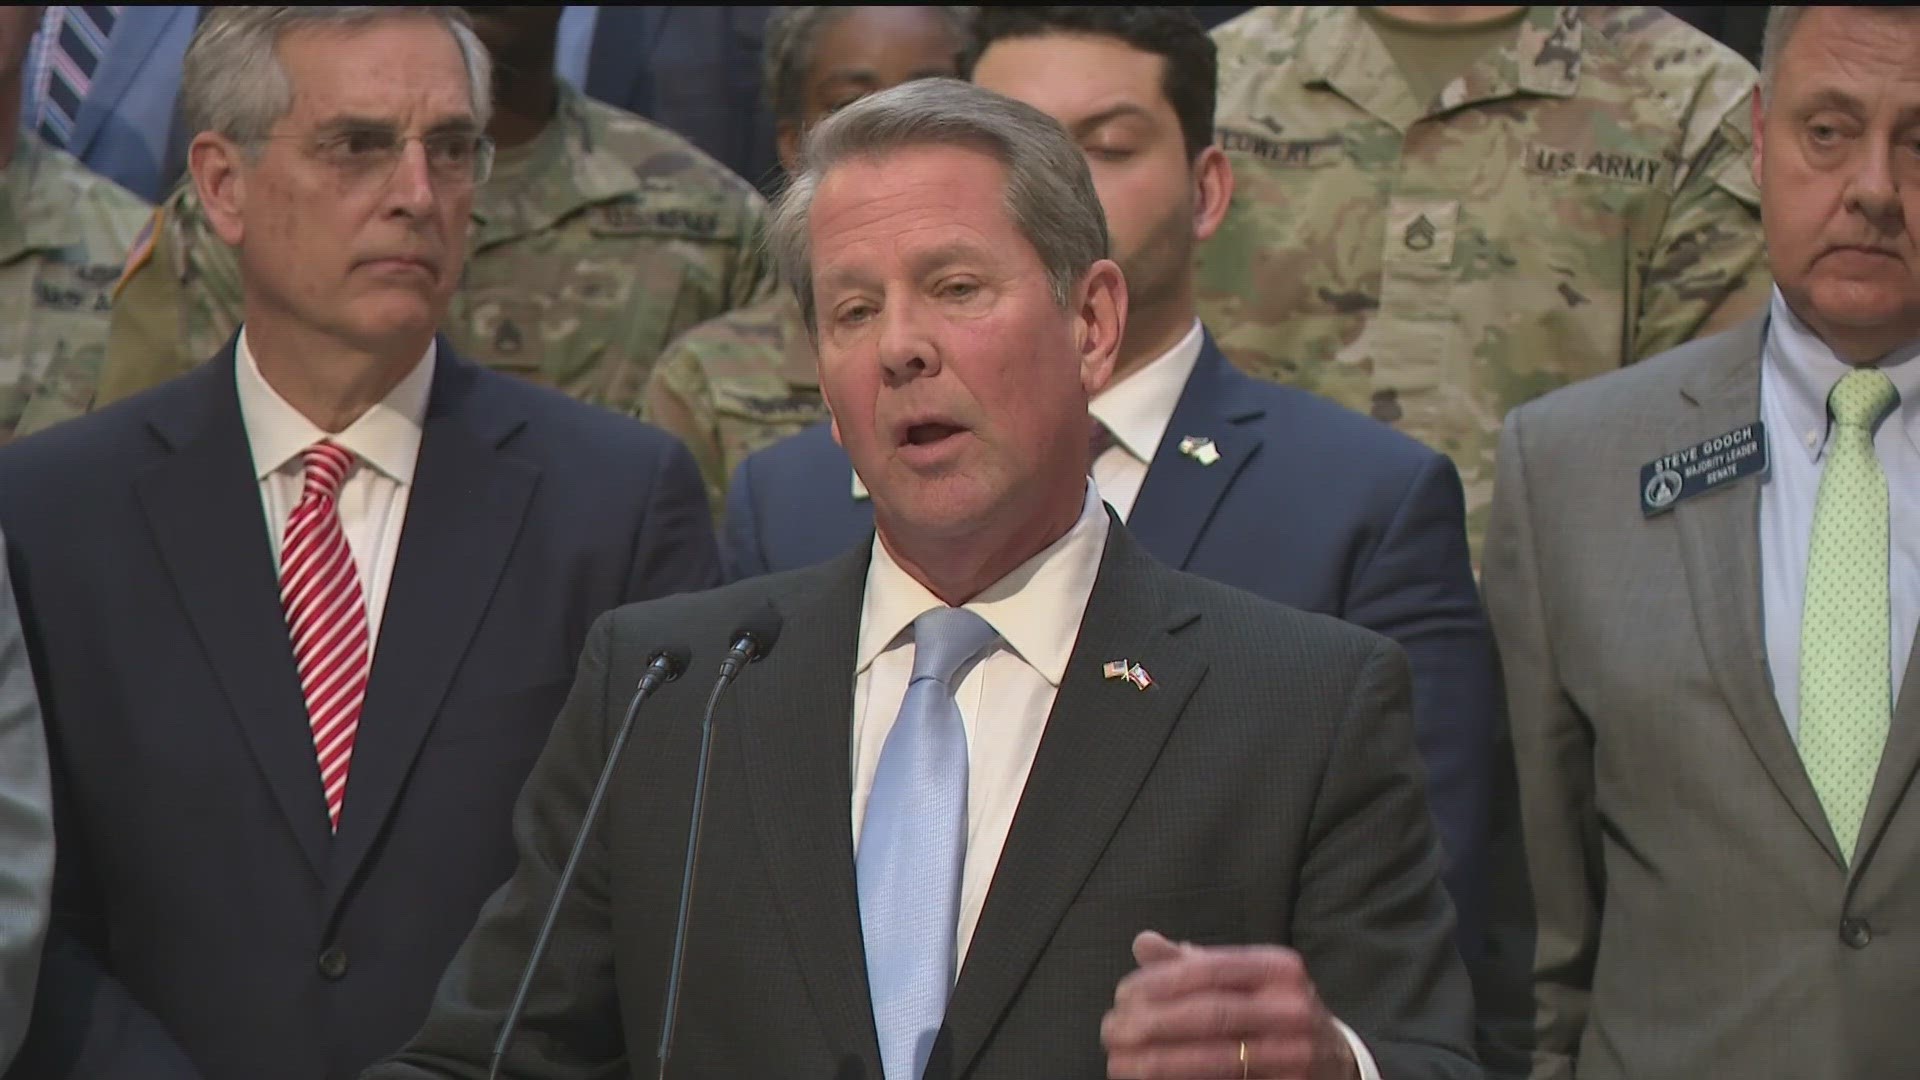 During a press conference, Kemp said the guard will assist with the construction of a command post at the border.